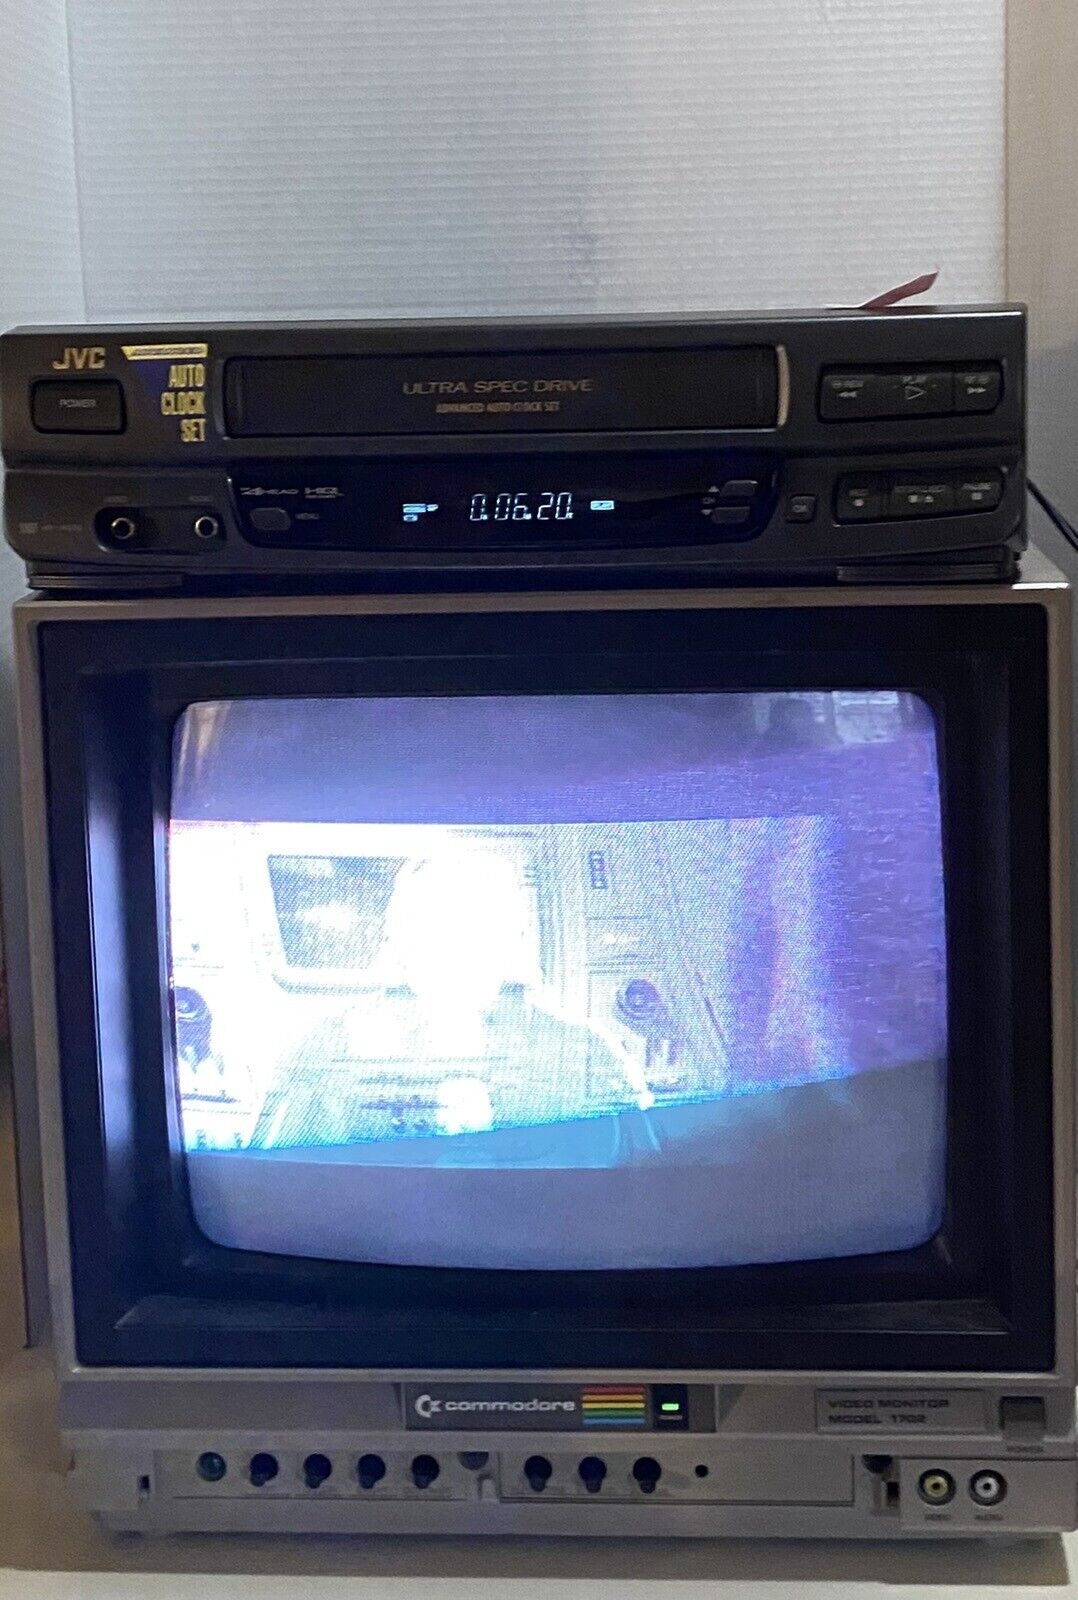 1984 Commodore 1702 Video Display CRT Monitor- Tested & WORKS